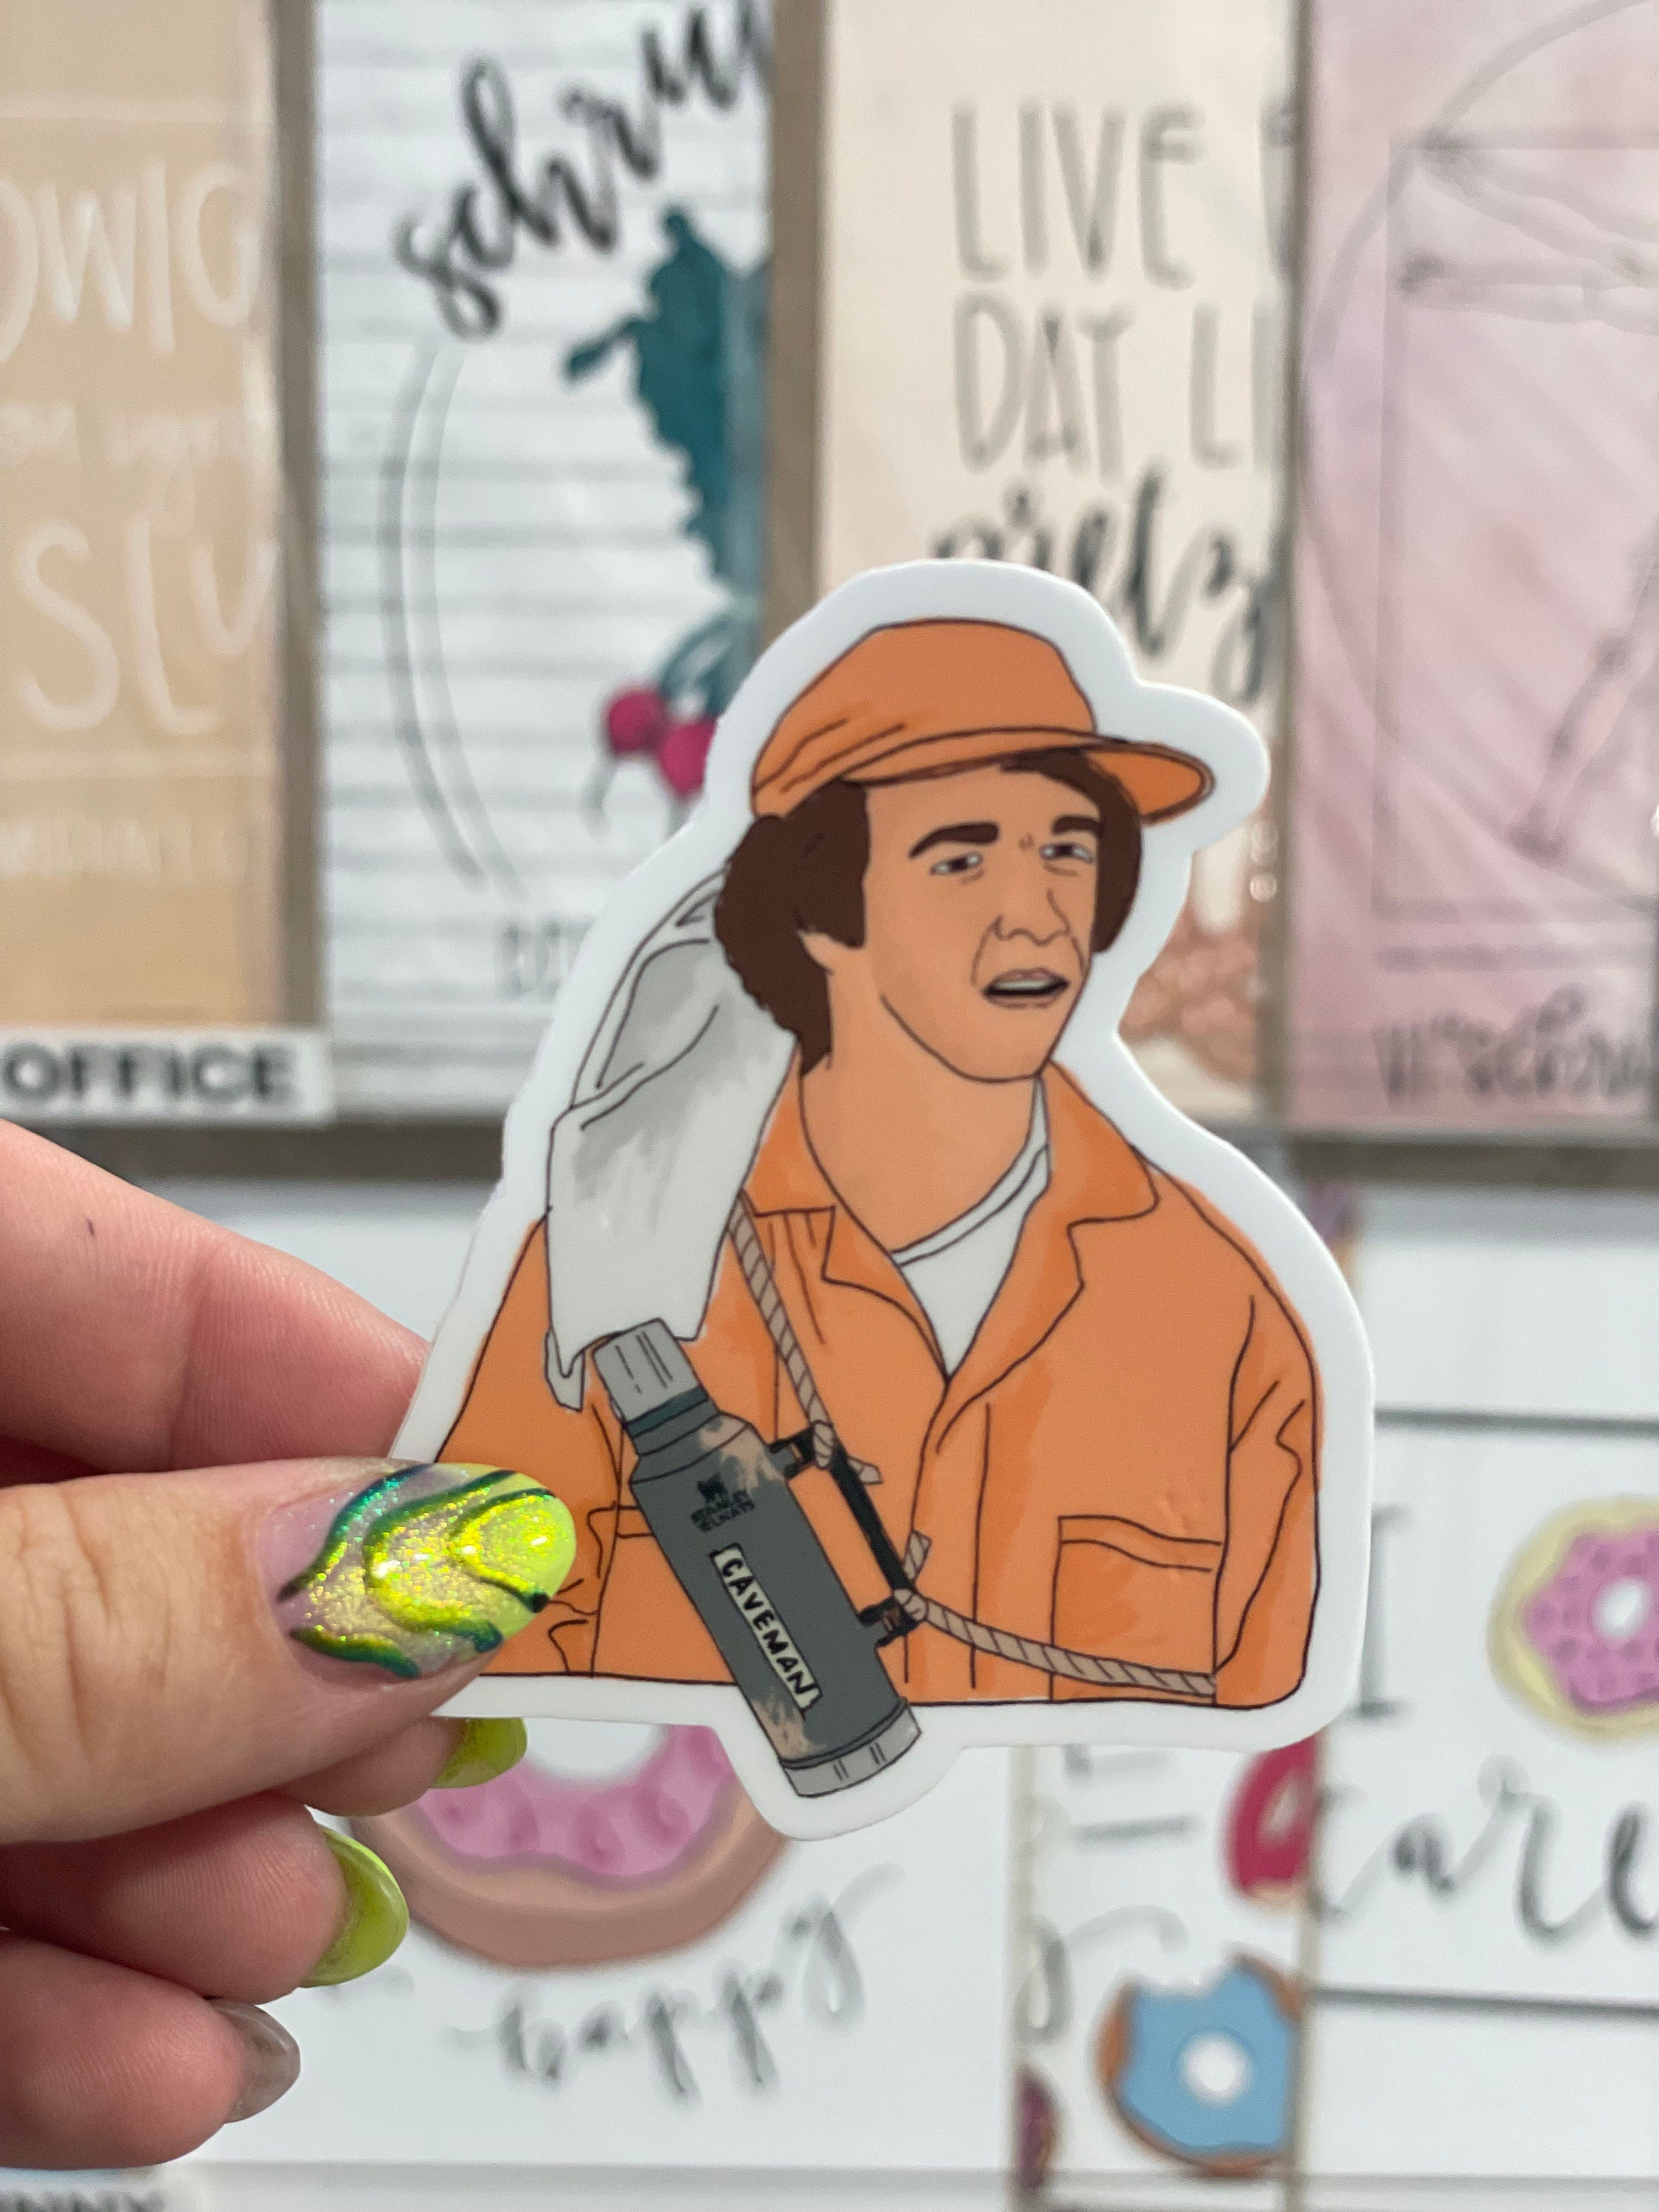 Stanley +  Stickers = 😍, Gallery posted by ChristinaDeVito